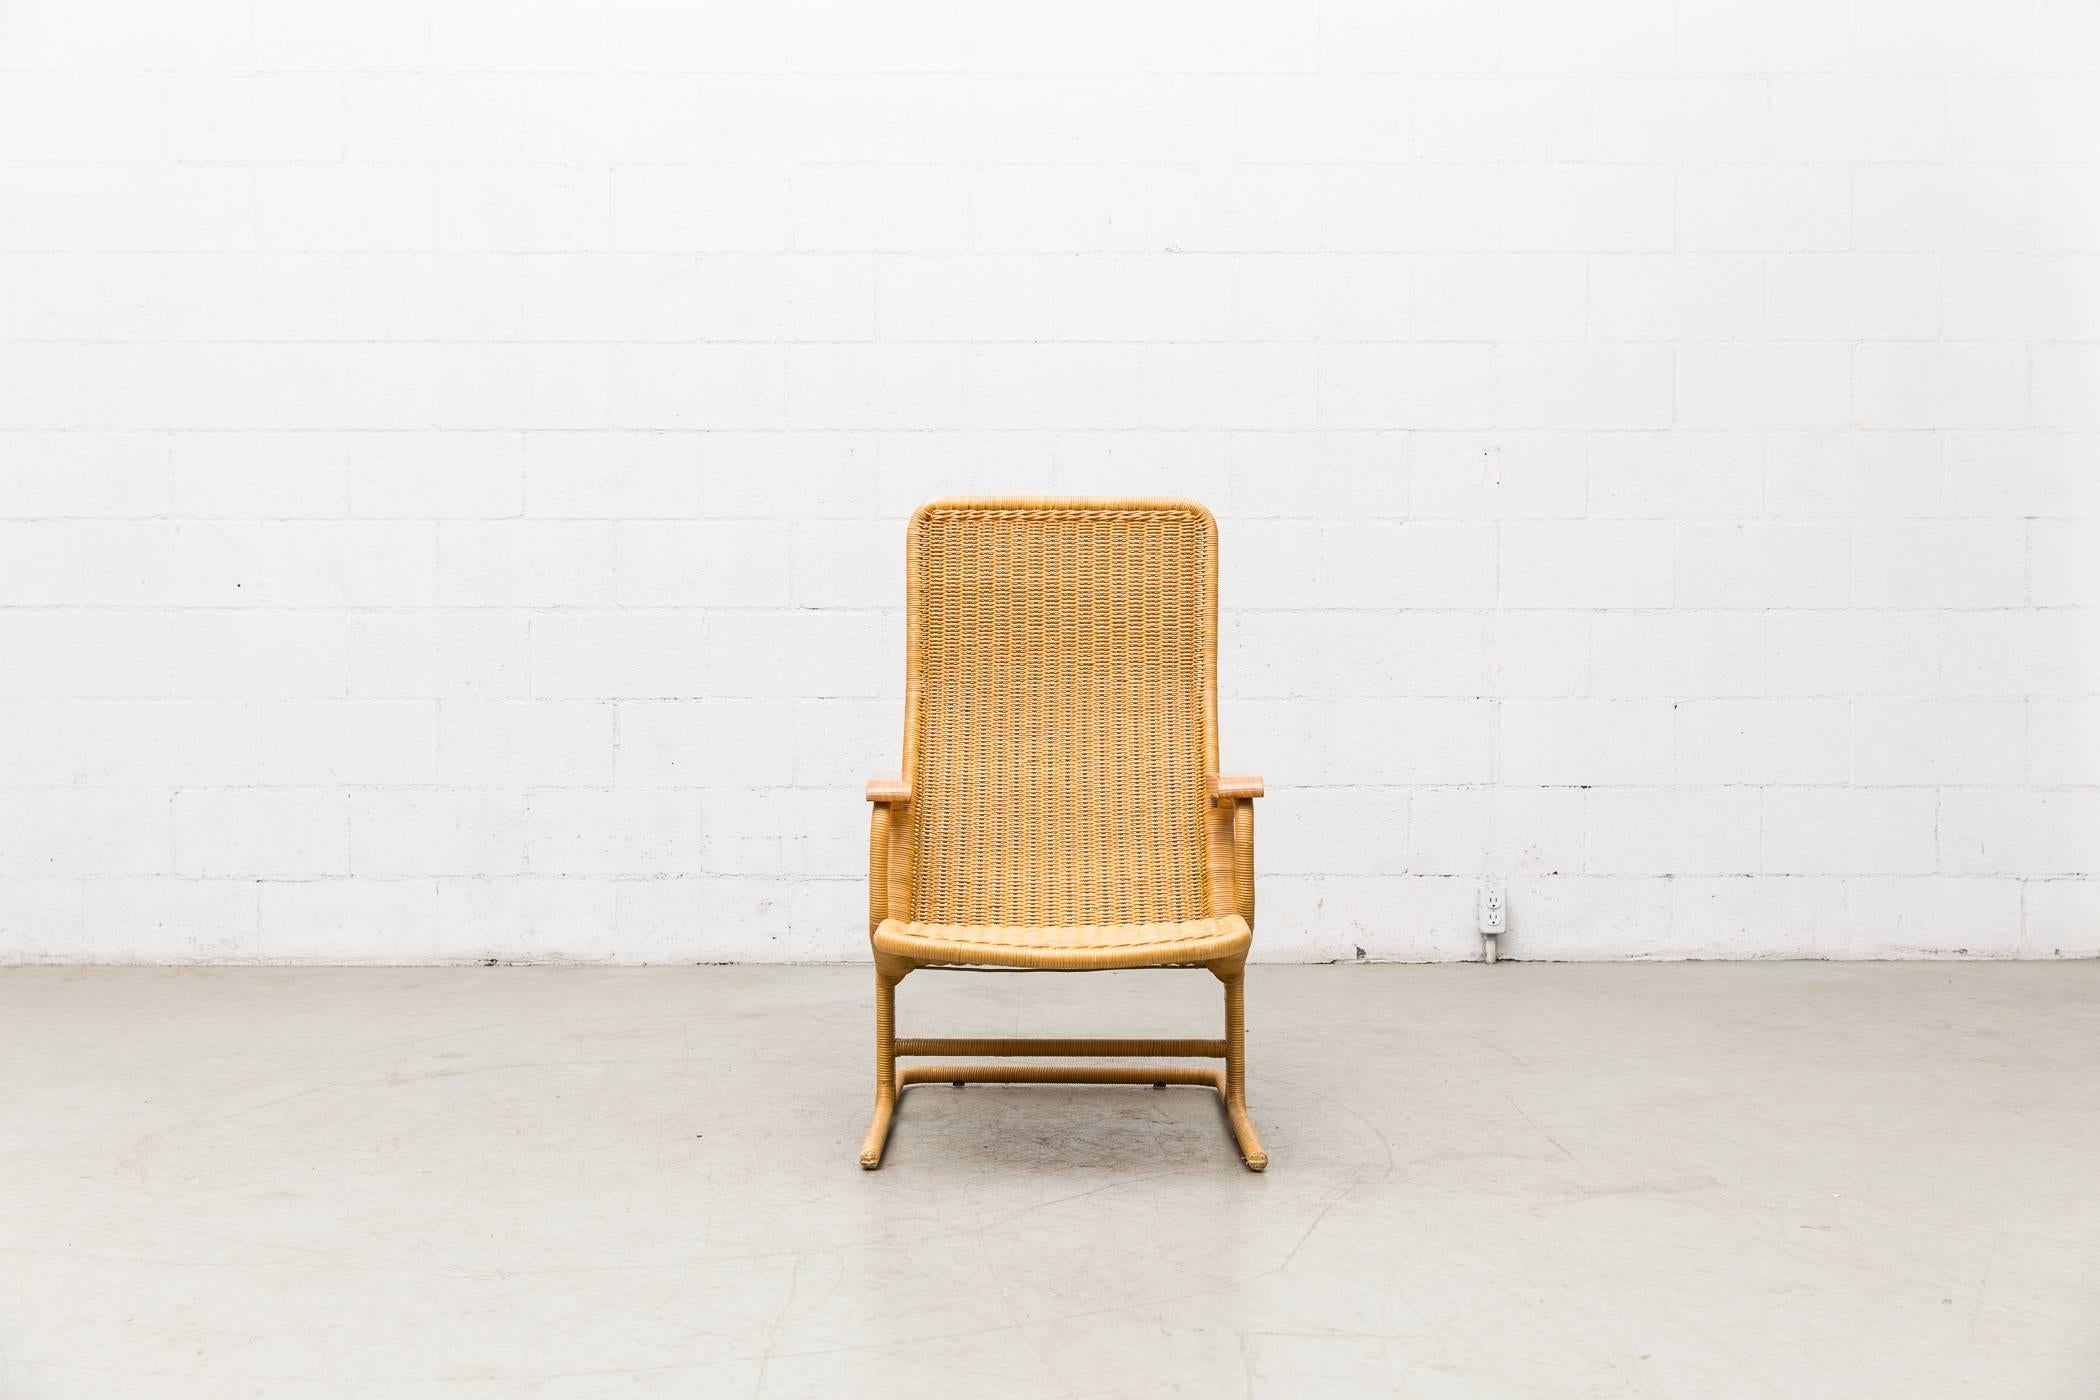 Elegantly woven Dirk Van Sliedregt rattan high-back lounge chair with natural wood arms. Tubular metal frame wrapped in bamboo. Good original condition with minimal rattan breakage. Similar styles available listed separately.